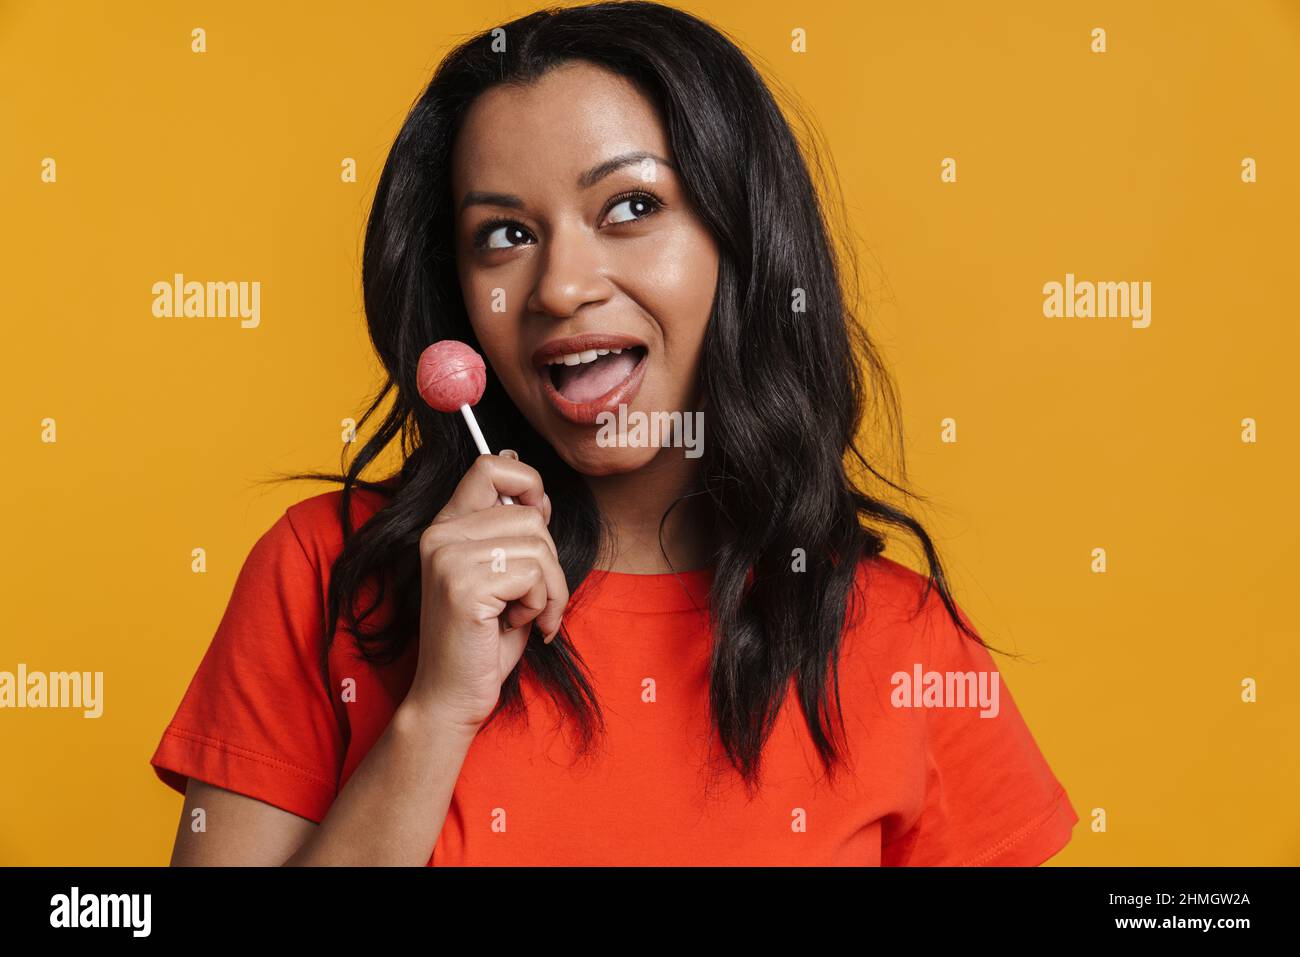 Young black woman smiling while licking lollipop isolated over yellow background Stock Photo